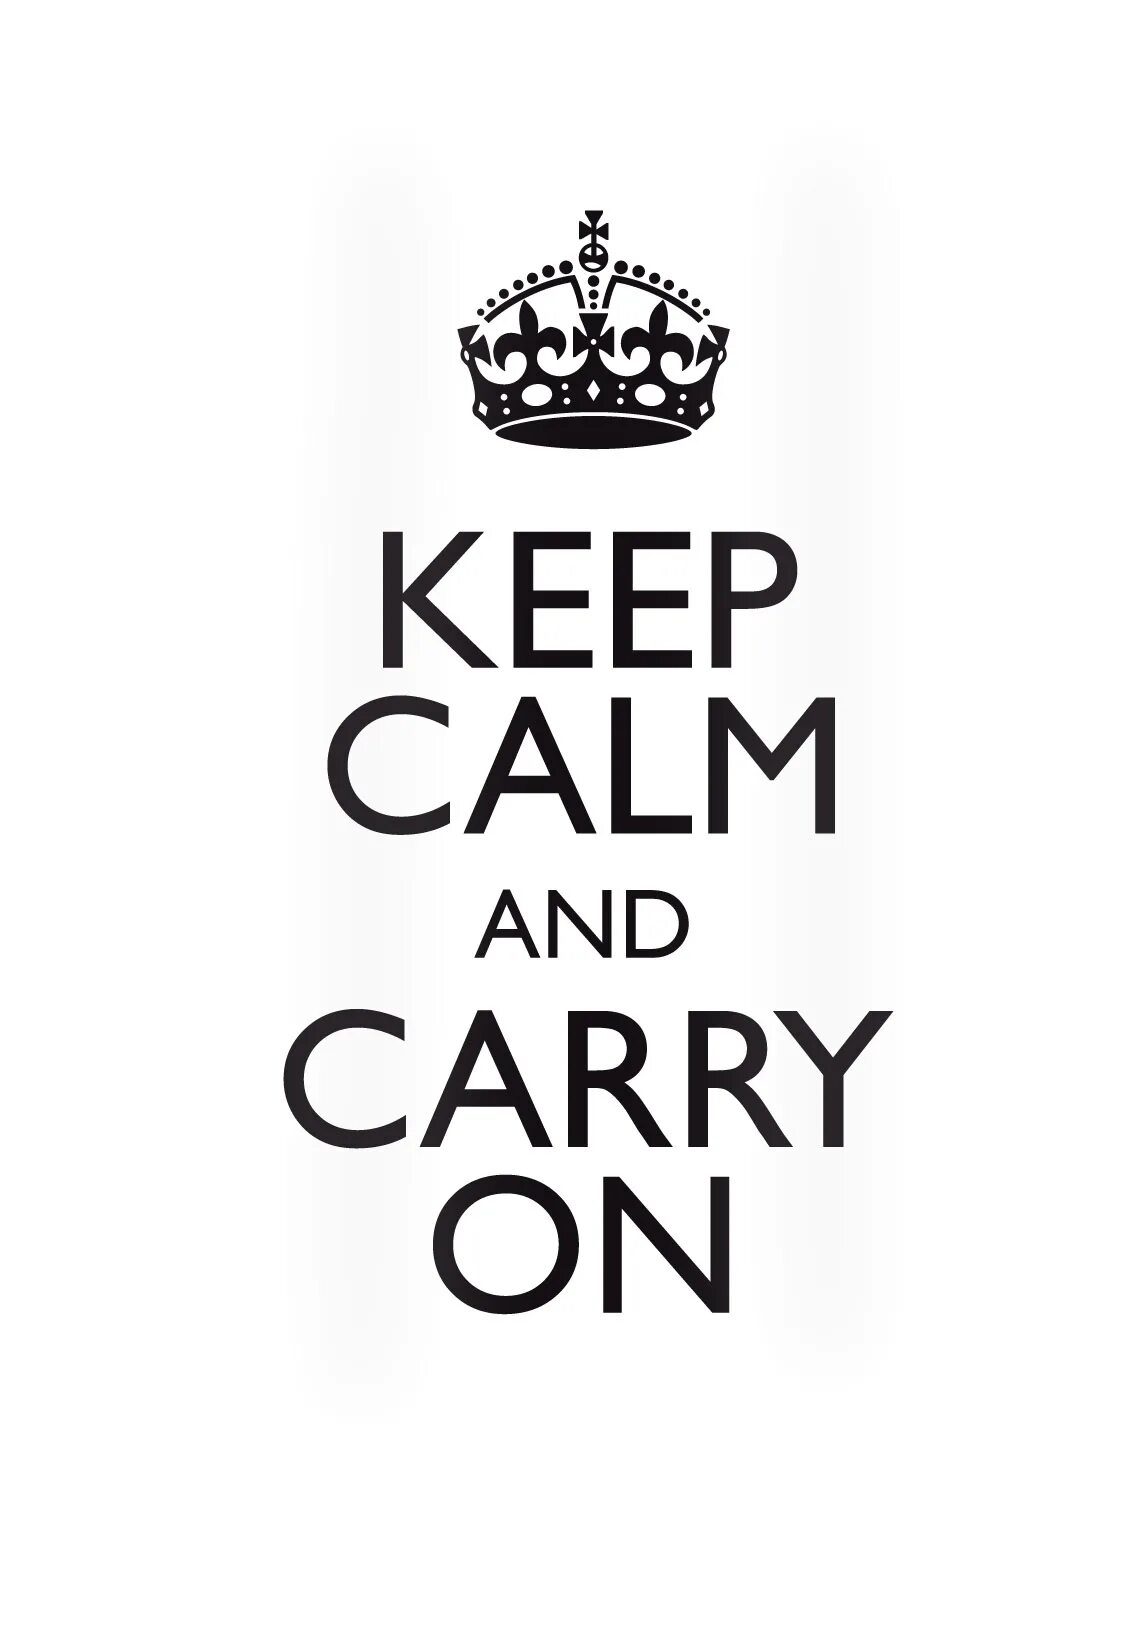 Keep Calm and carry. Keep Calm and carry on. Keep Calm and carry on плакат. Keep Calm перевод на русский.